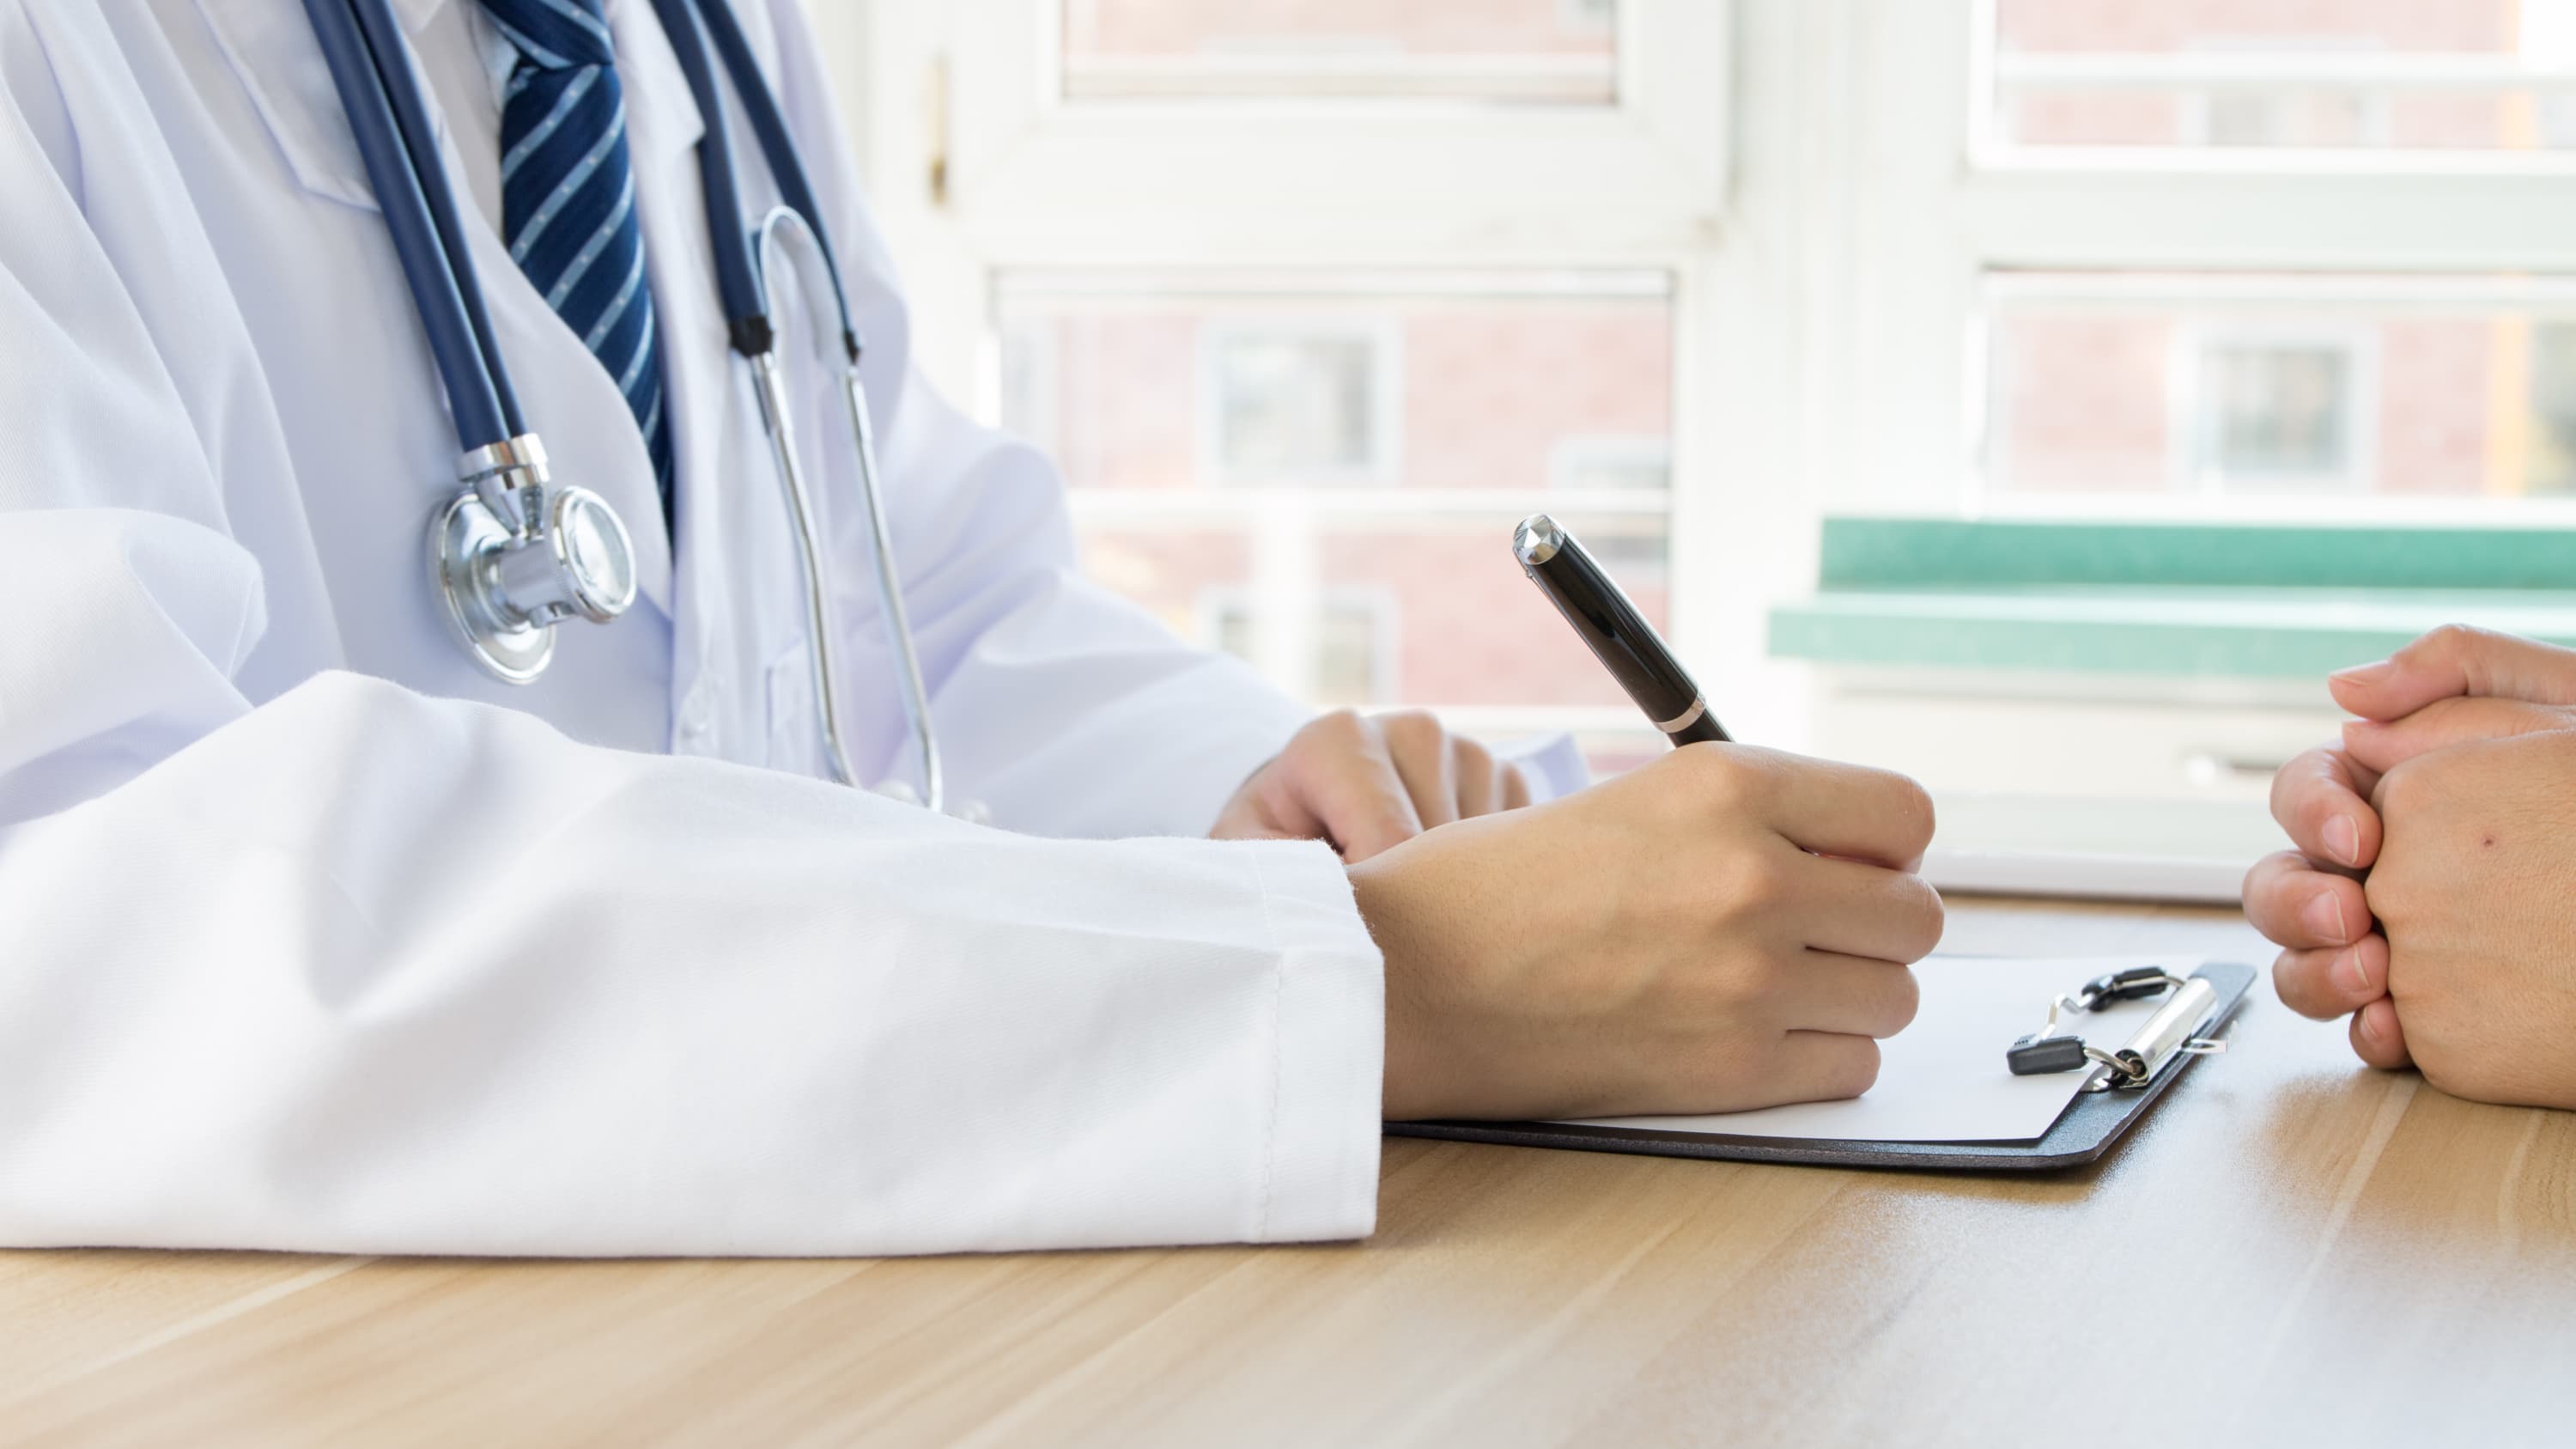 .A doctor writes notes for a patient, one possibly with Hepatitis B or C